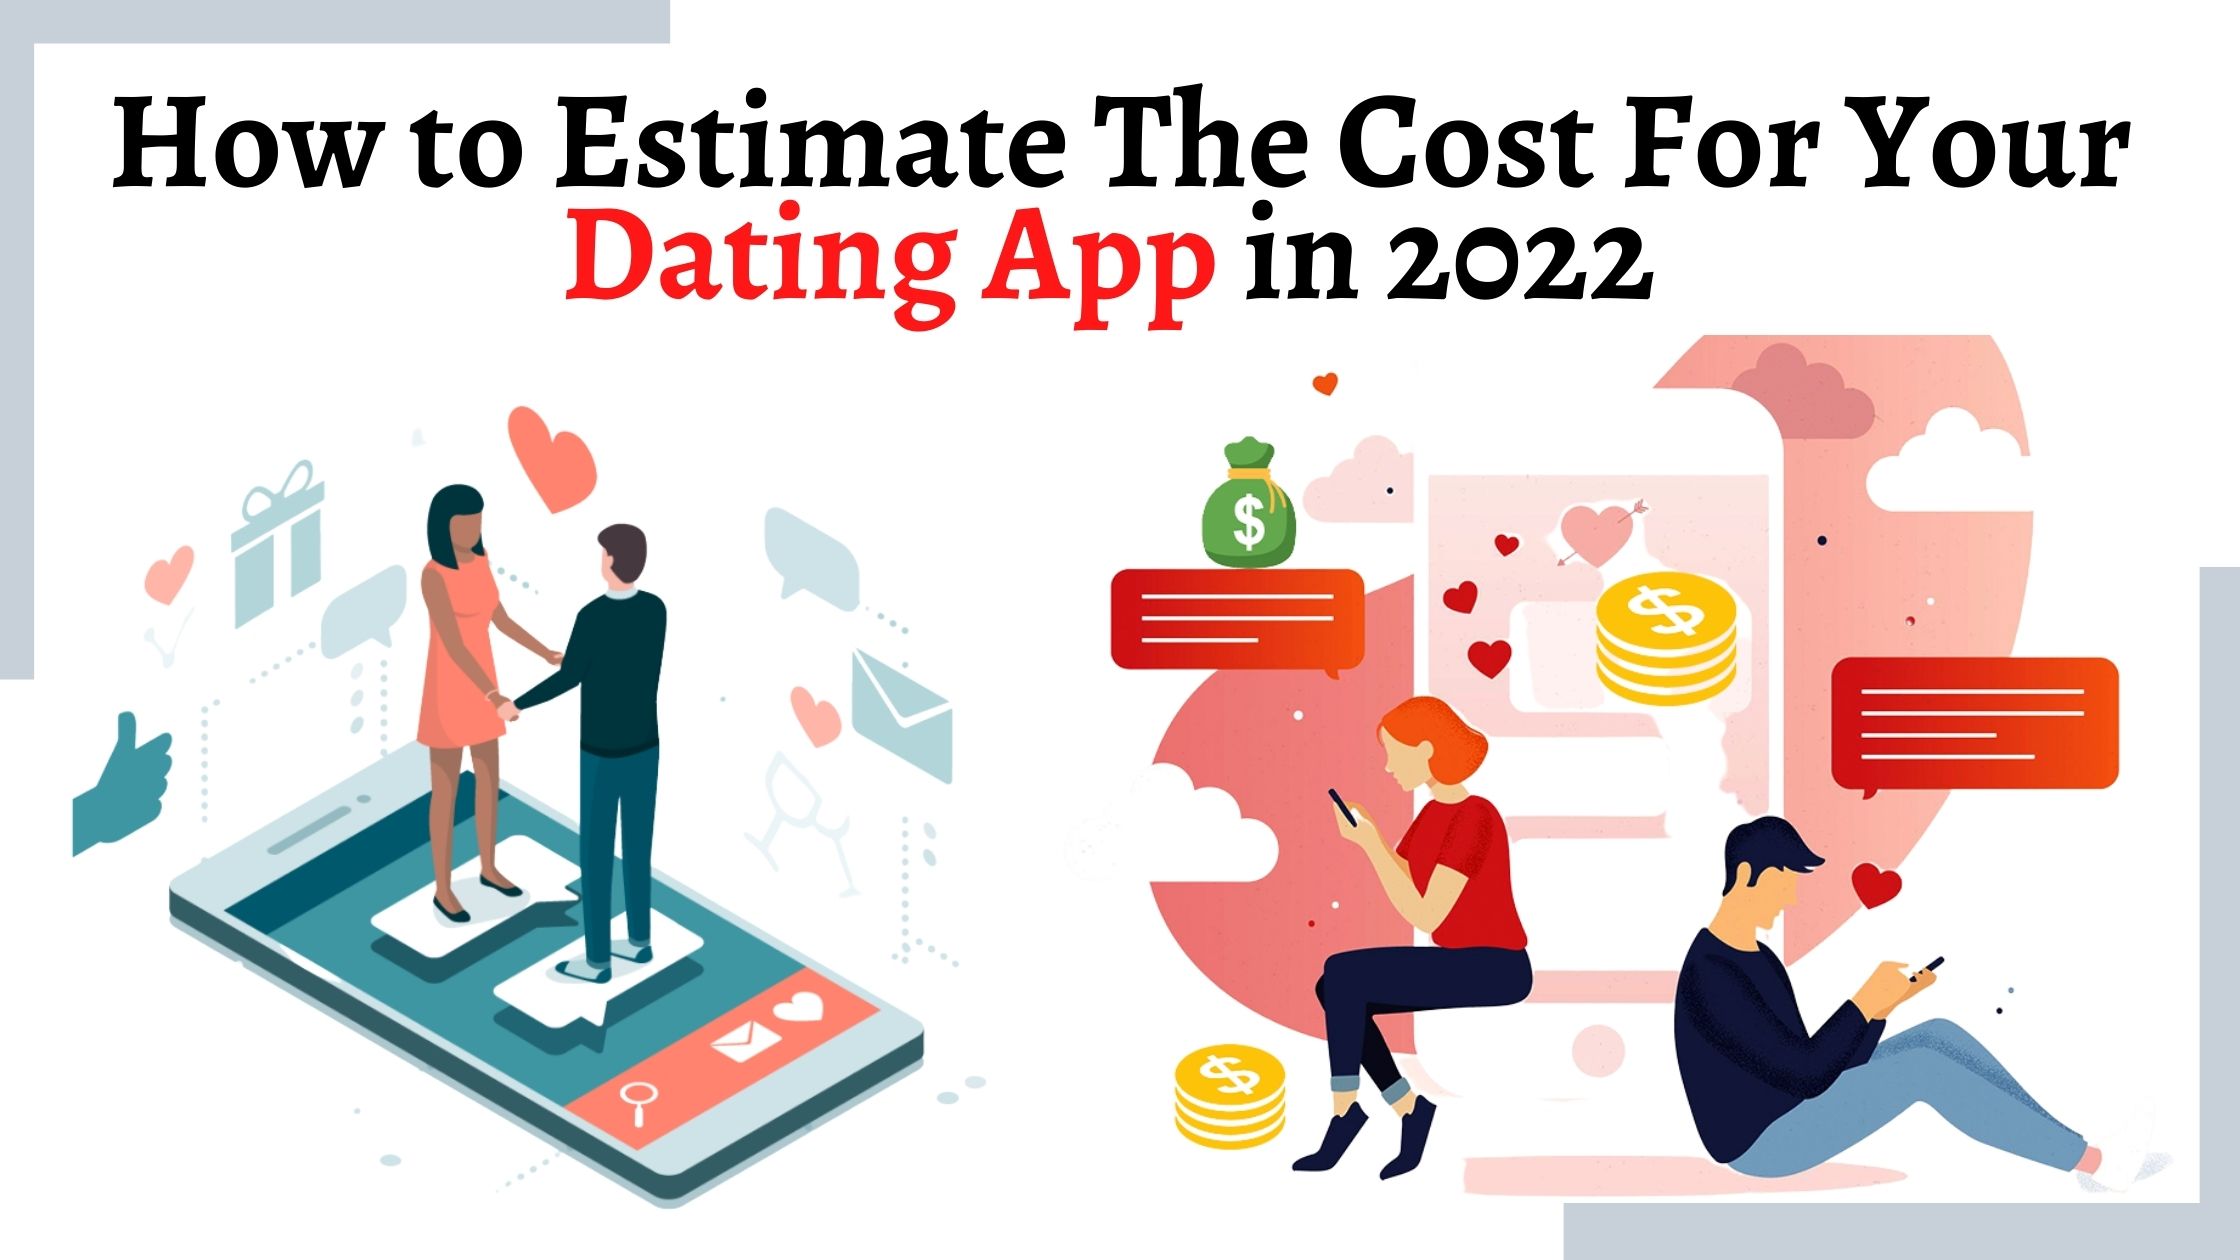 How to Estimate The Cost For Your Dating App in 2022